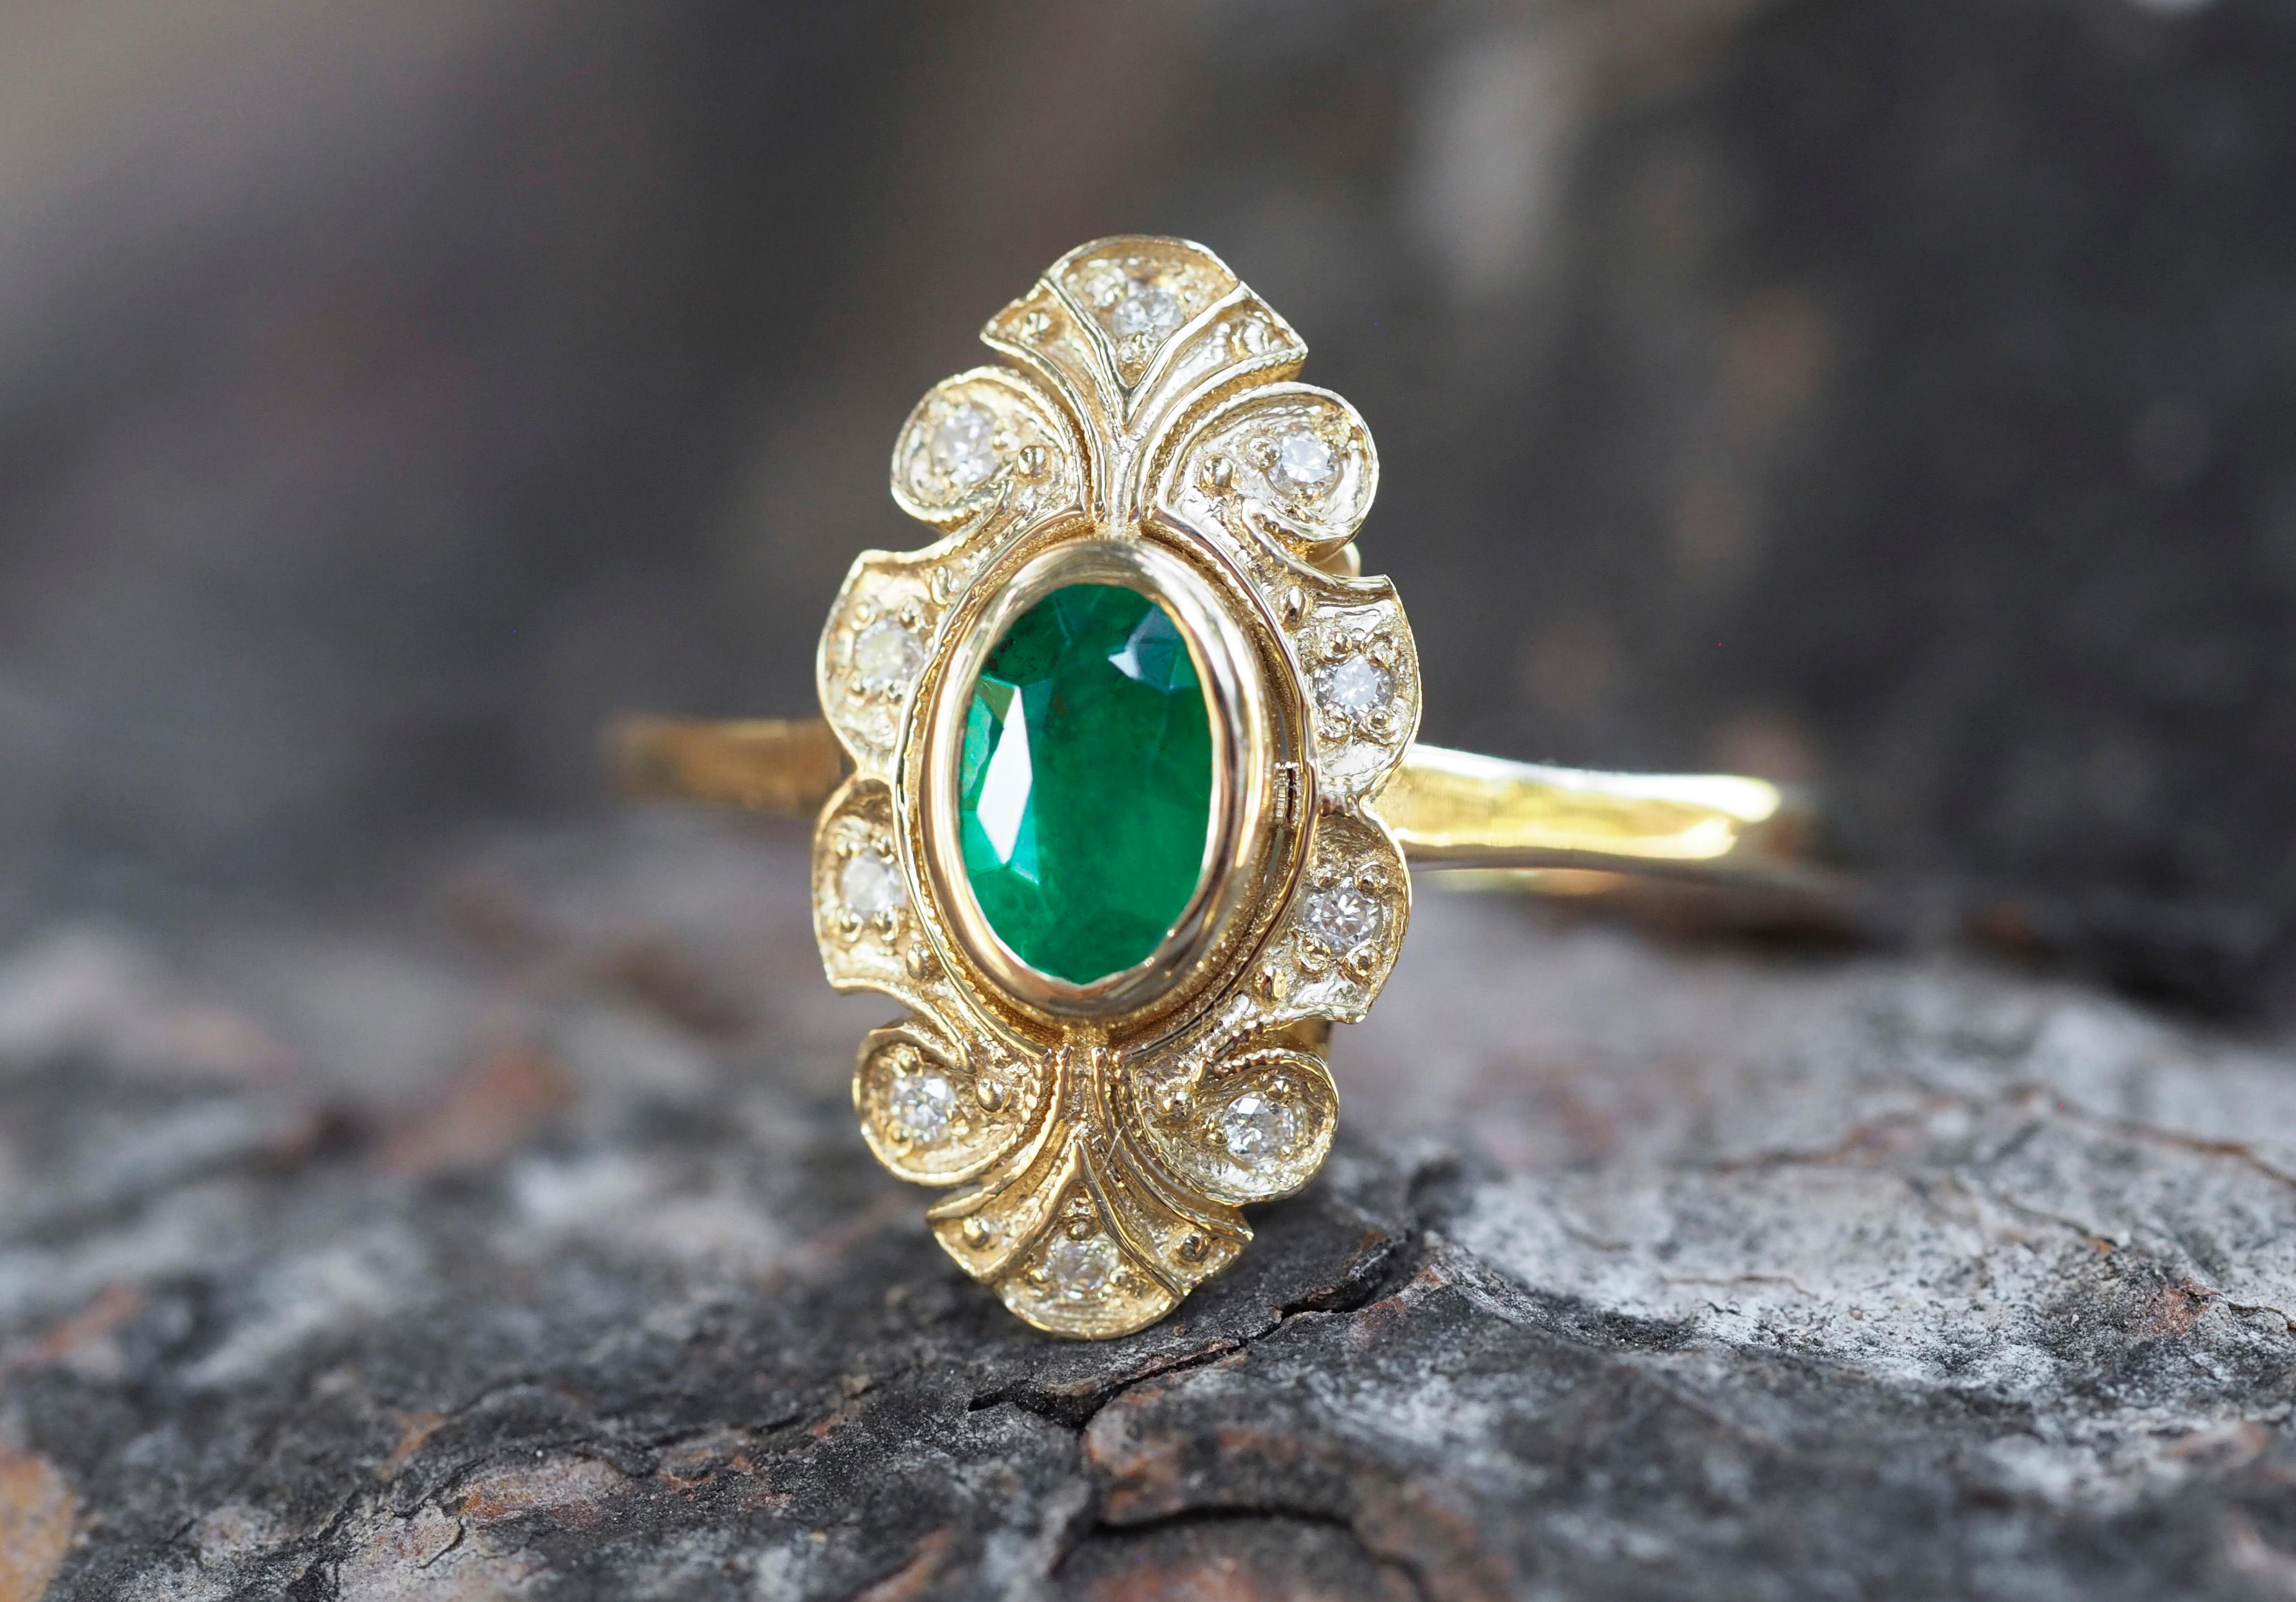 For Sale:  14k Gold Ring with Oval Emerald and Diamonds, Vintage Inspired Ring 7